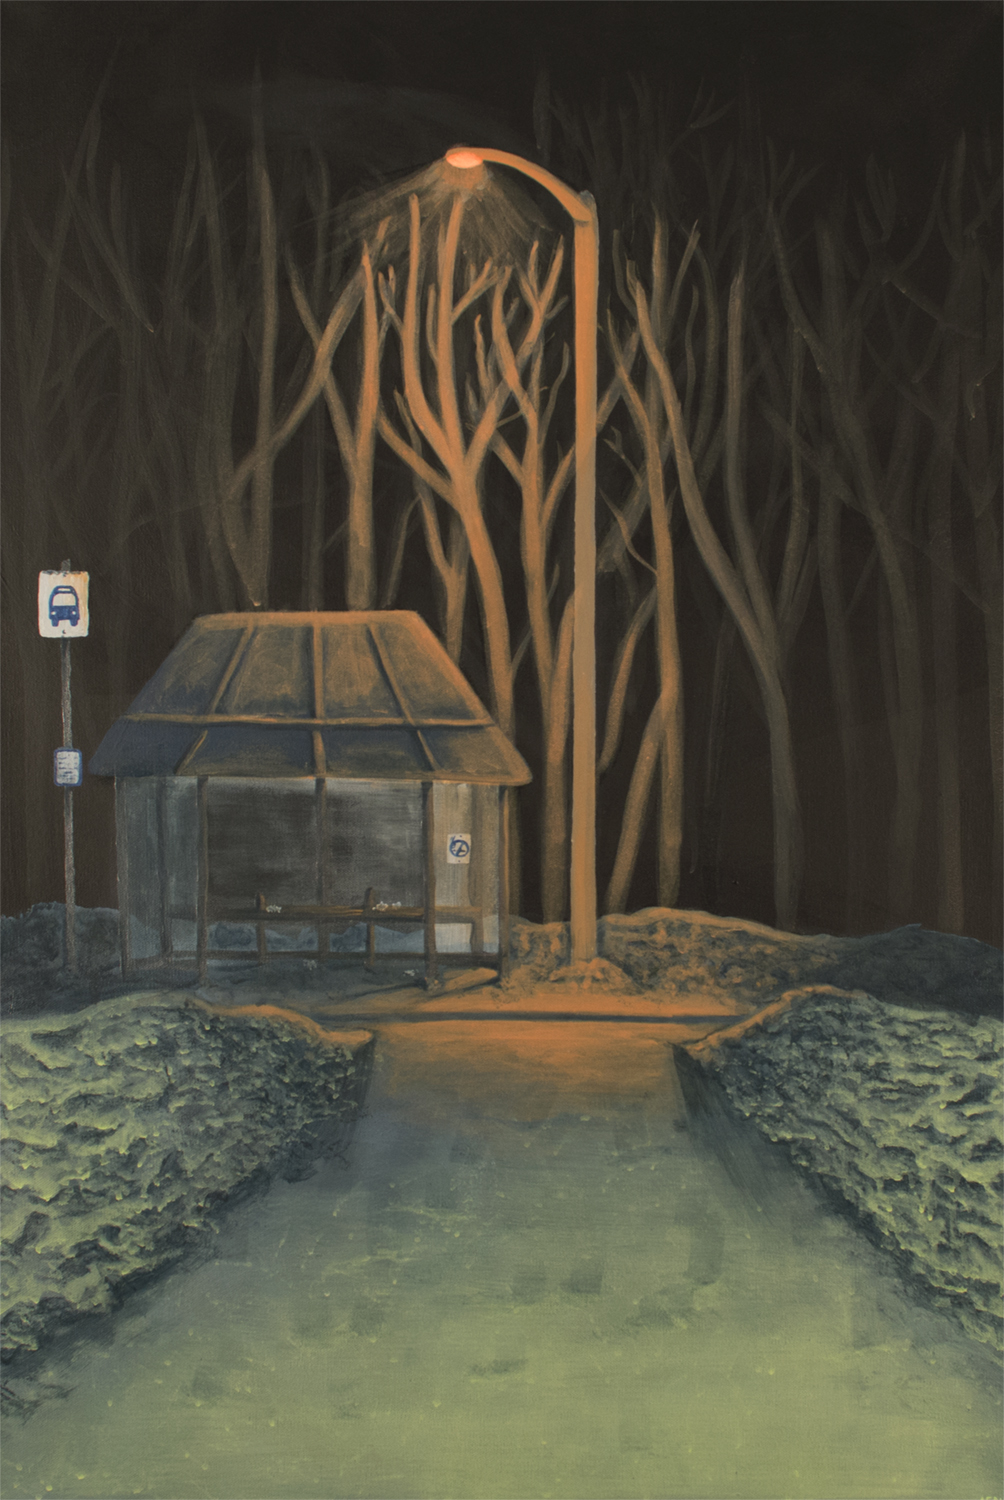 bus stop on a snowy night, courtesy of the artist